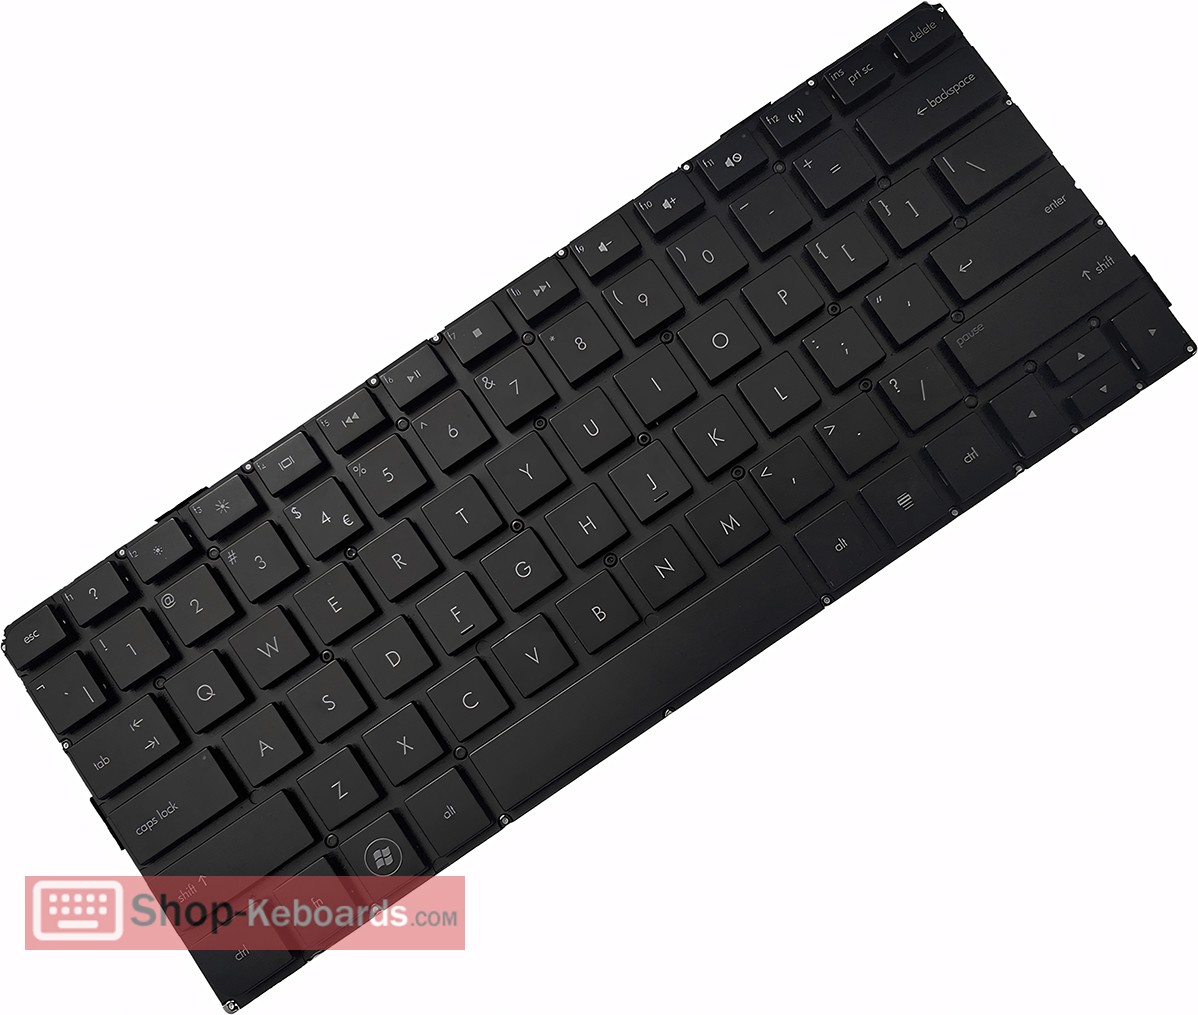 HP Envy 13-1080 SERIES Keyboard replacement